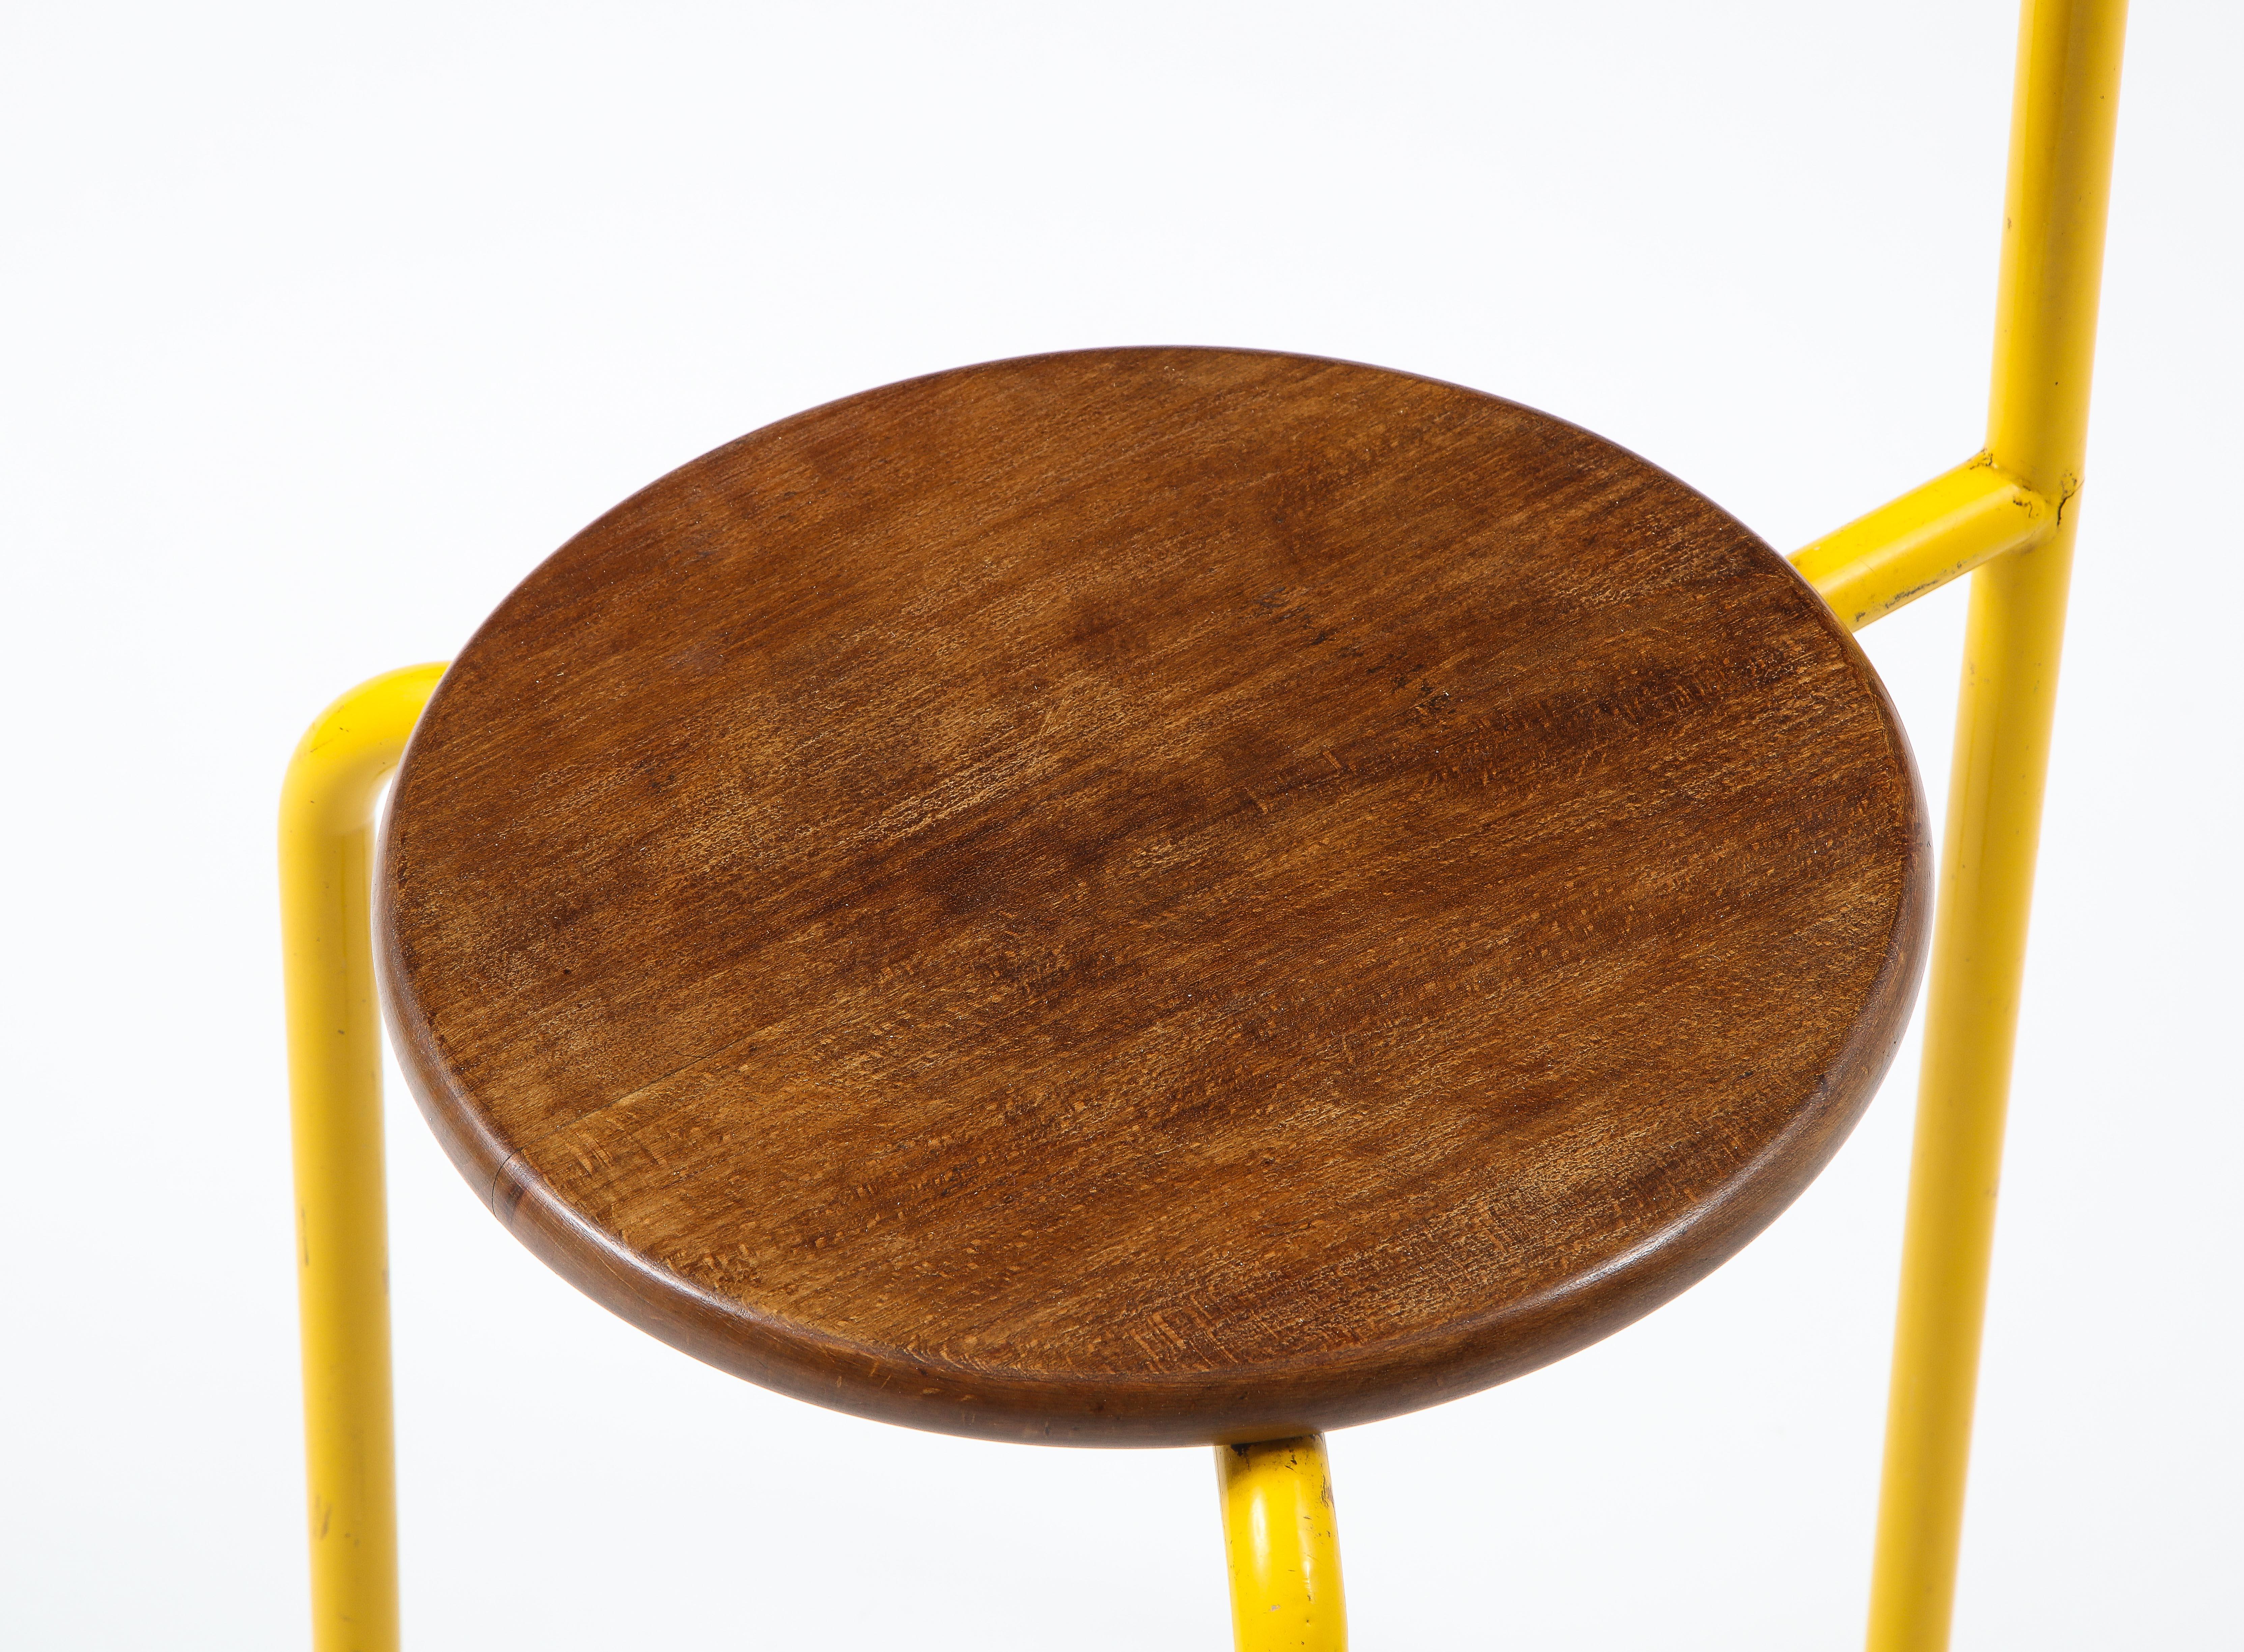 Post modern tripod chair in yellow enameled steel with an oak seat and accents.